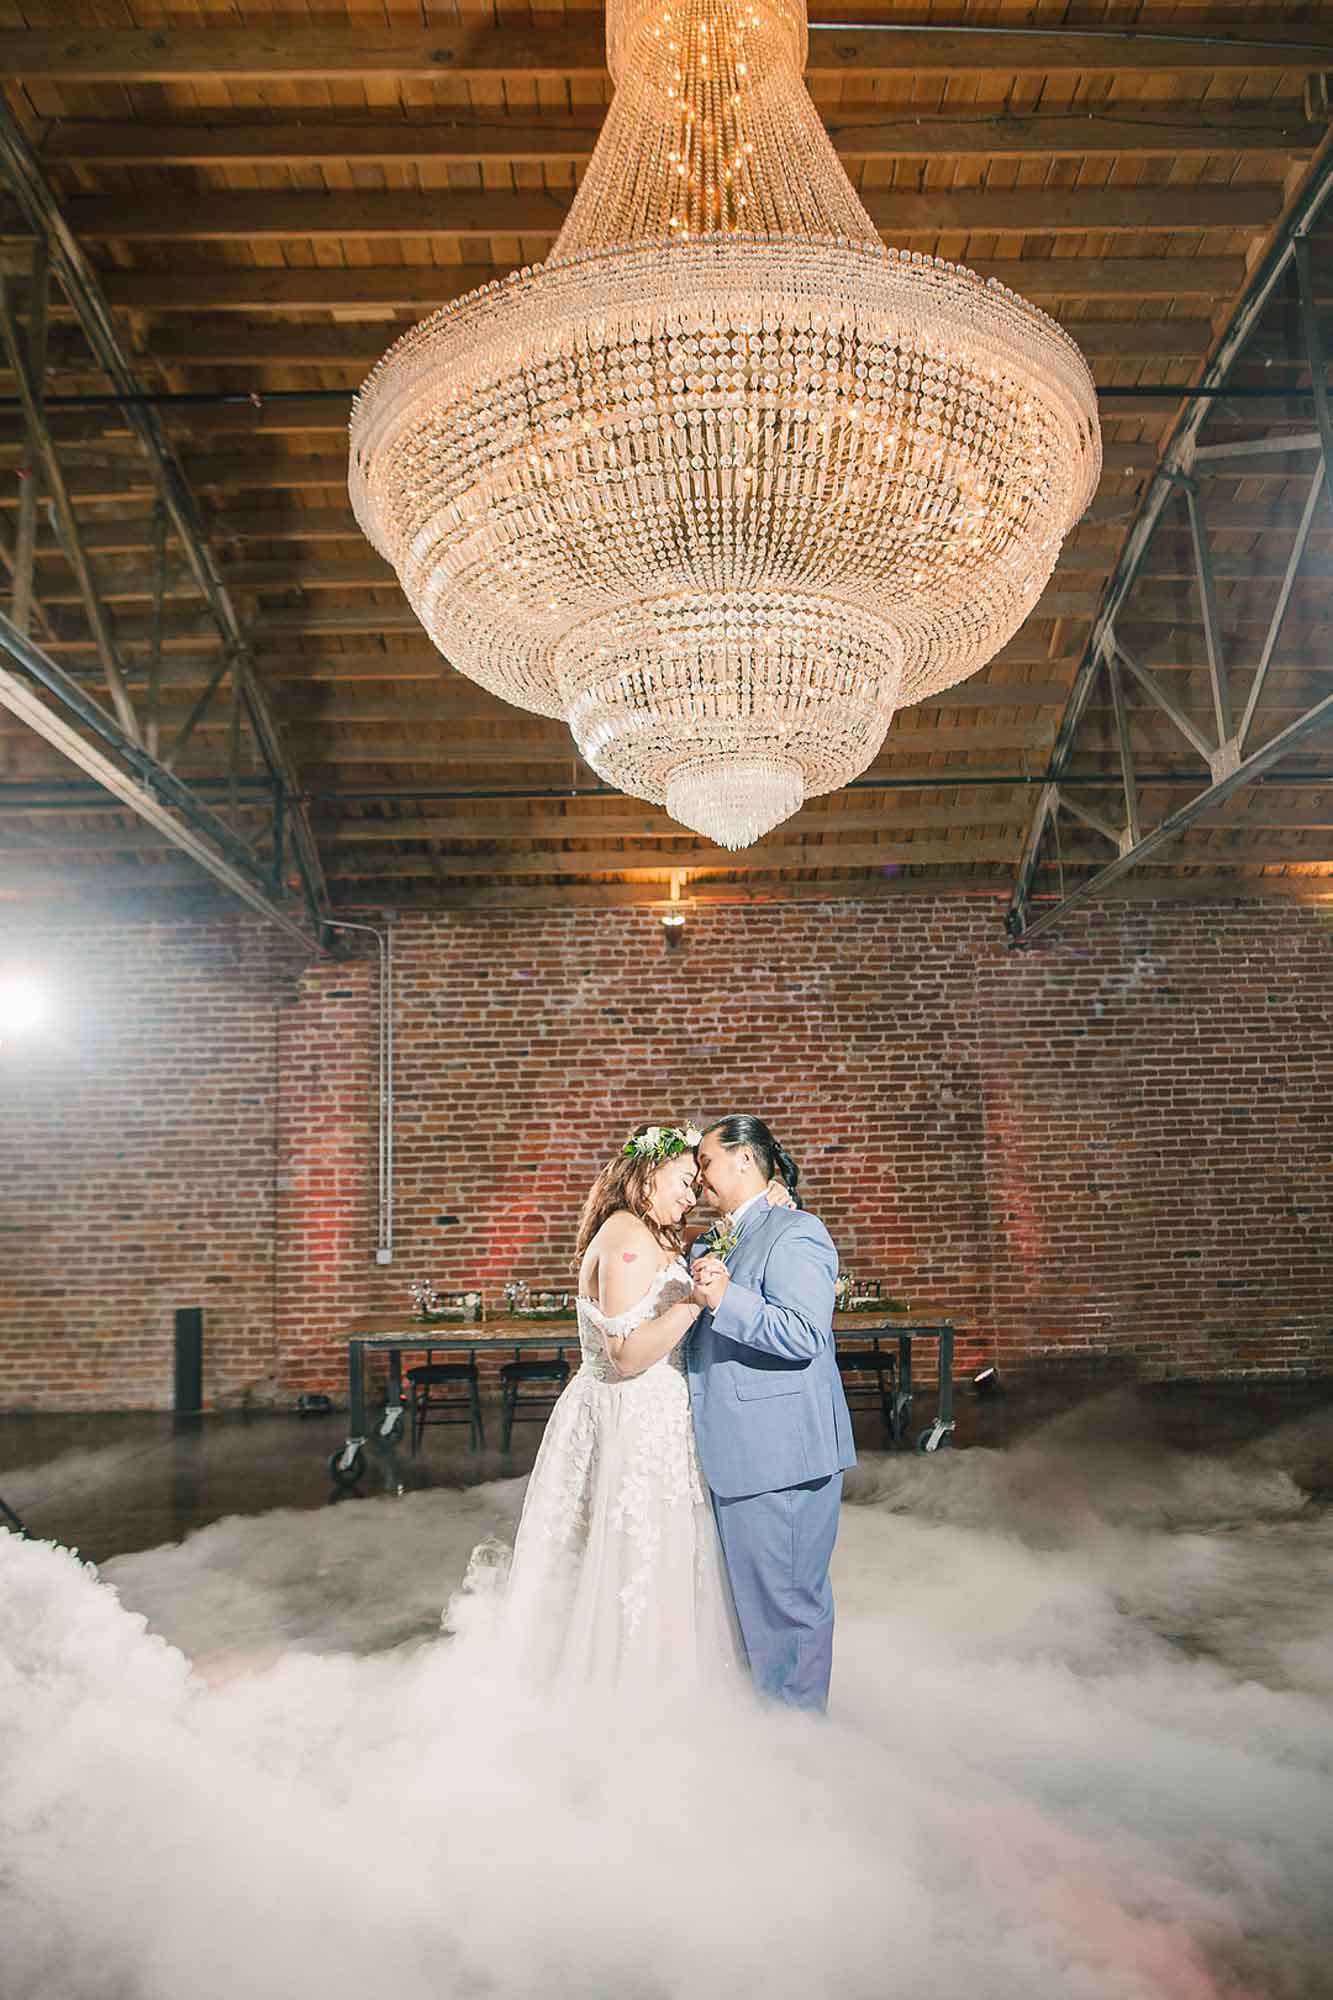 Pastel-colored wedding ideas with dreamy special effects | eGolden Moments Photography | Featured on Equally Wed, the leading LGBTQ+ wedding magazine